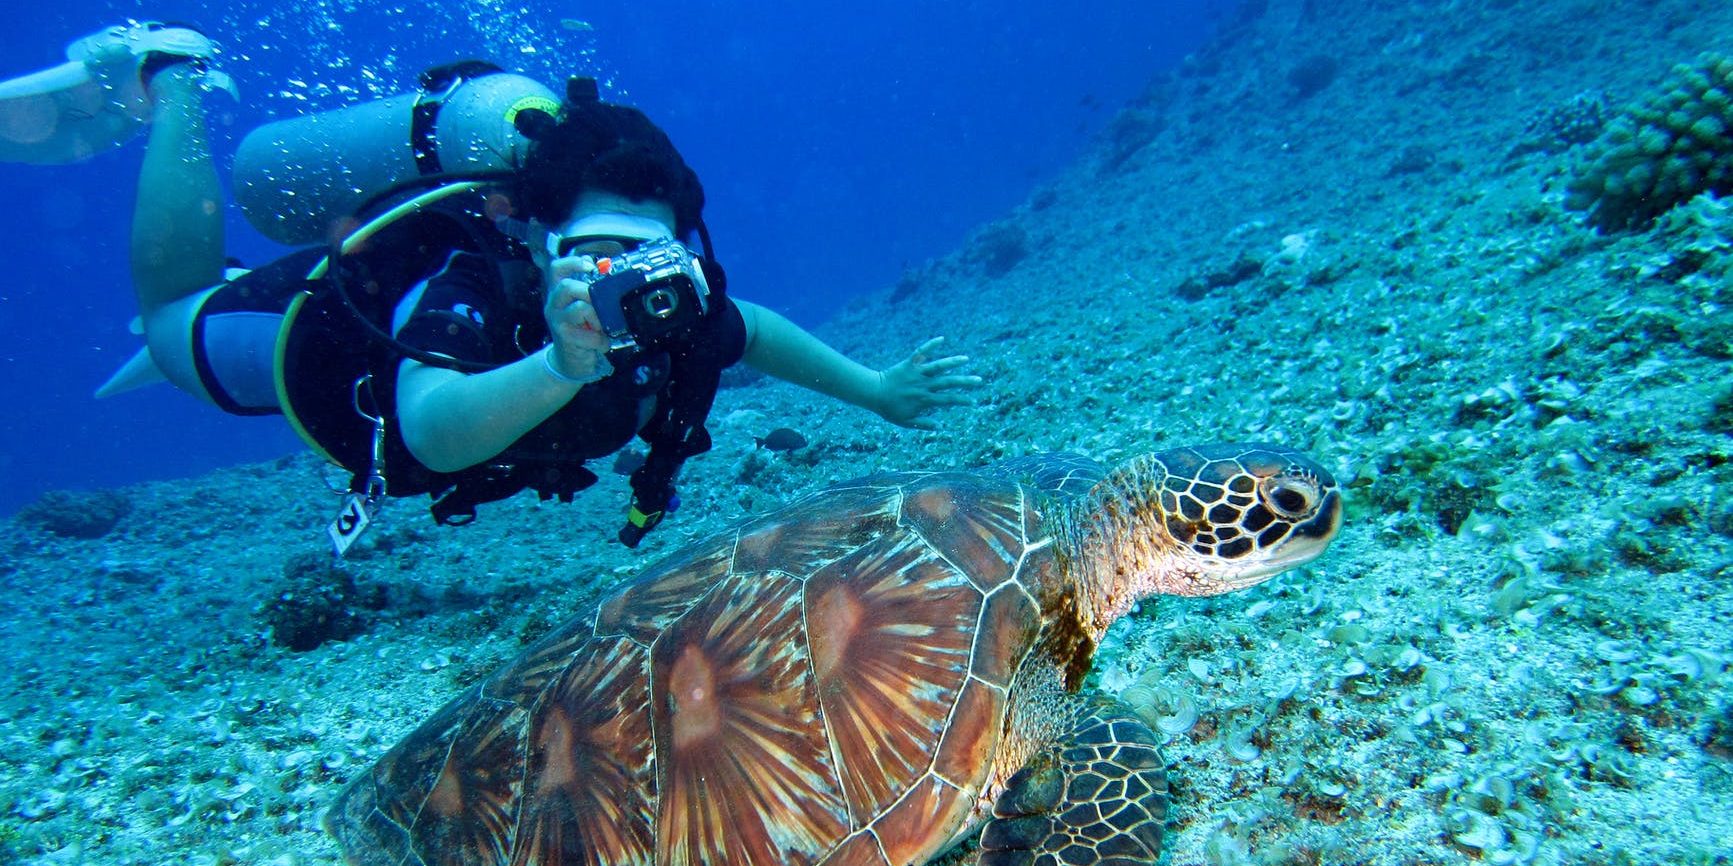 A diver takes a photograph of a swimming sea turtle